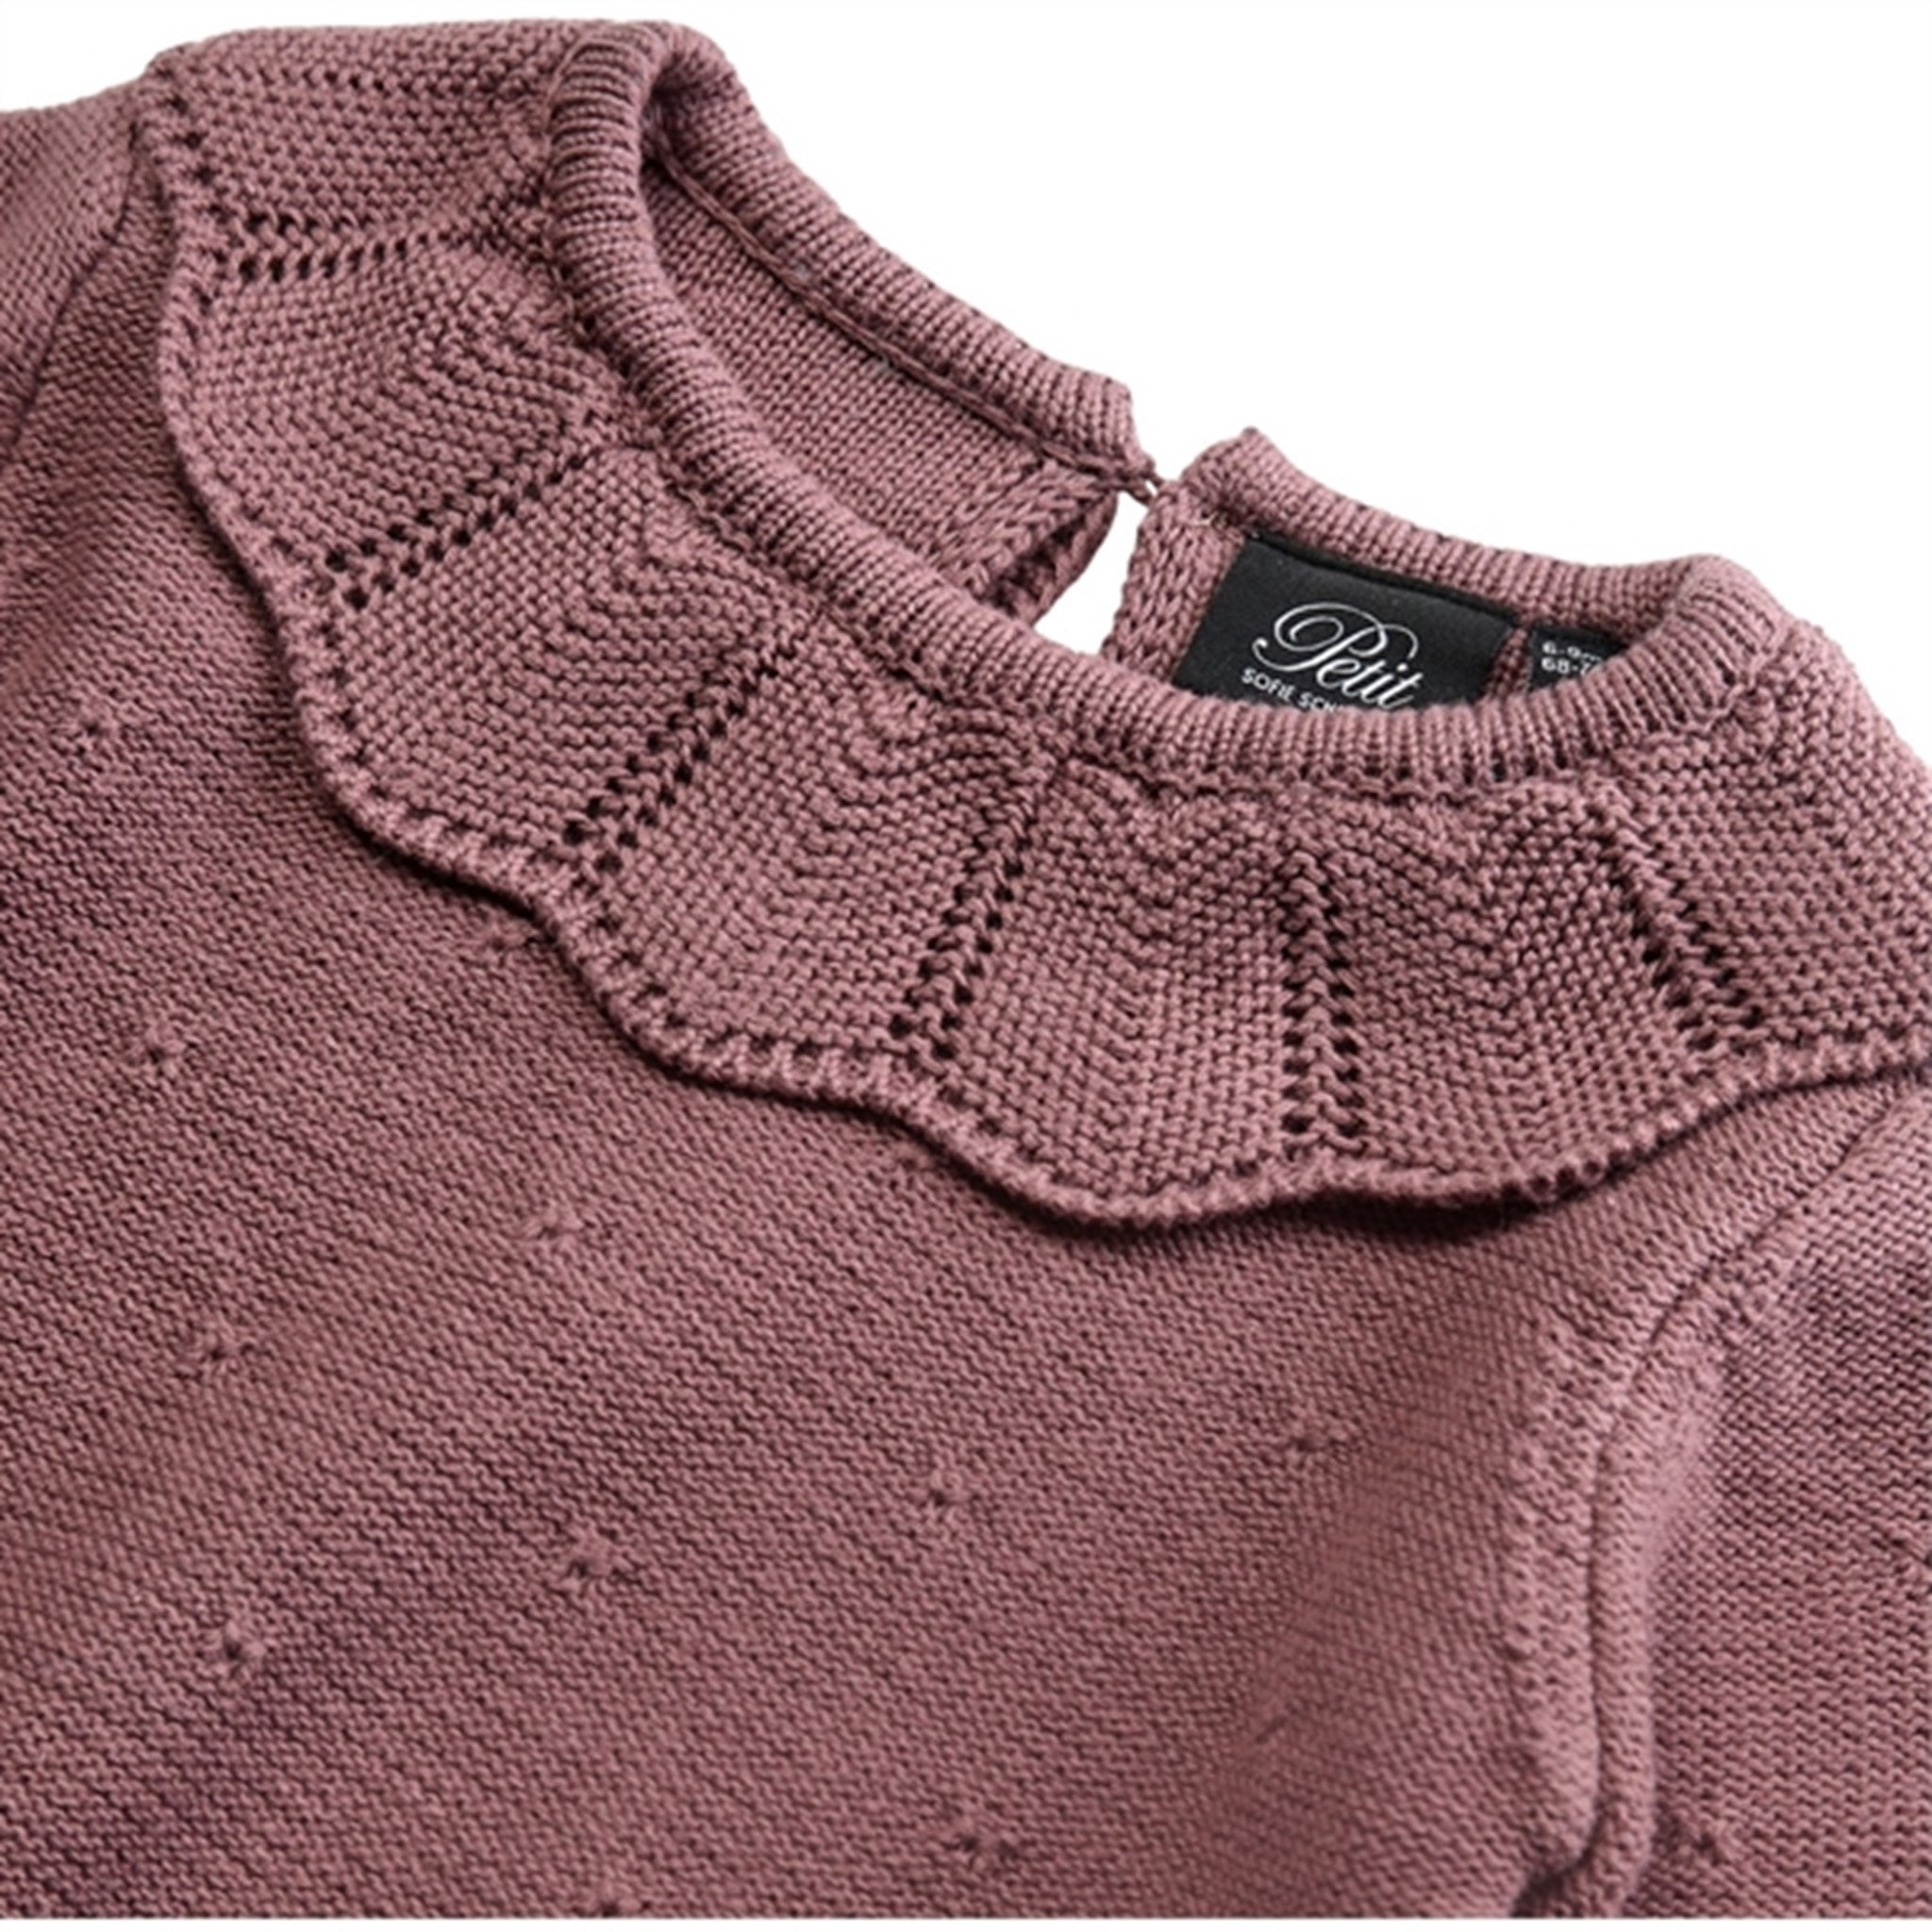 Sofie Schnoor Bright Lilac Knit 2